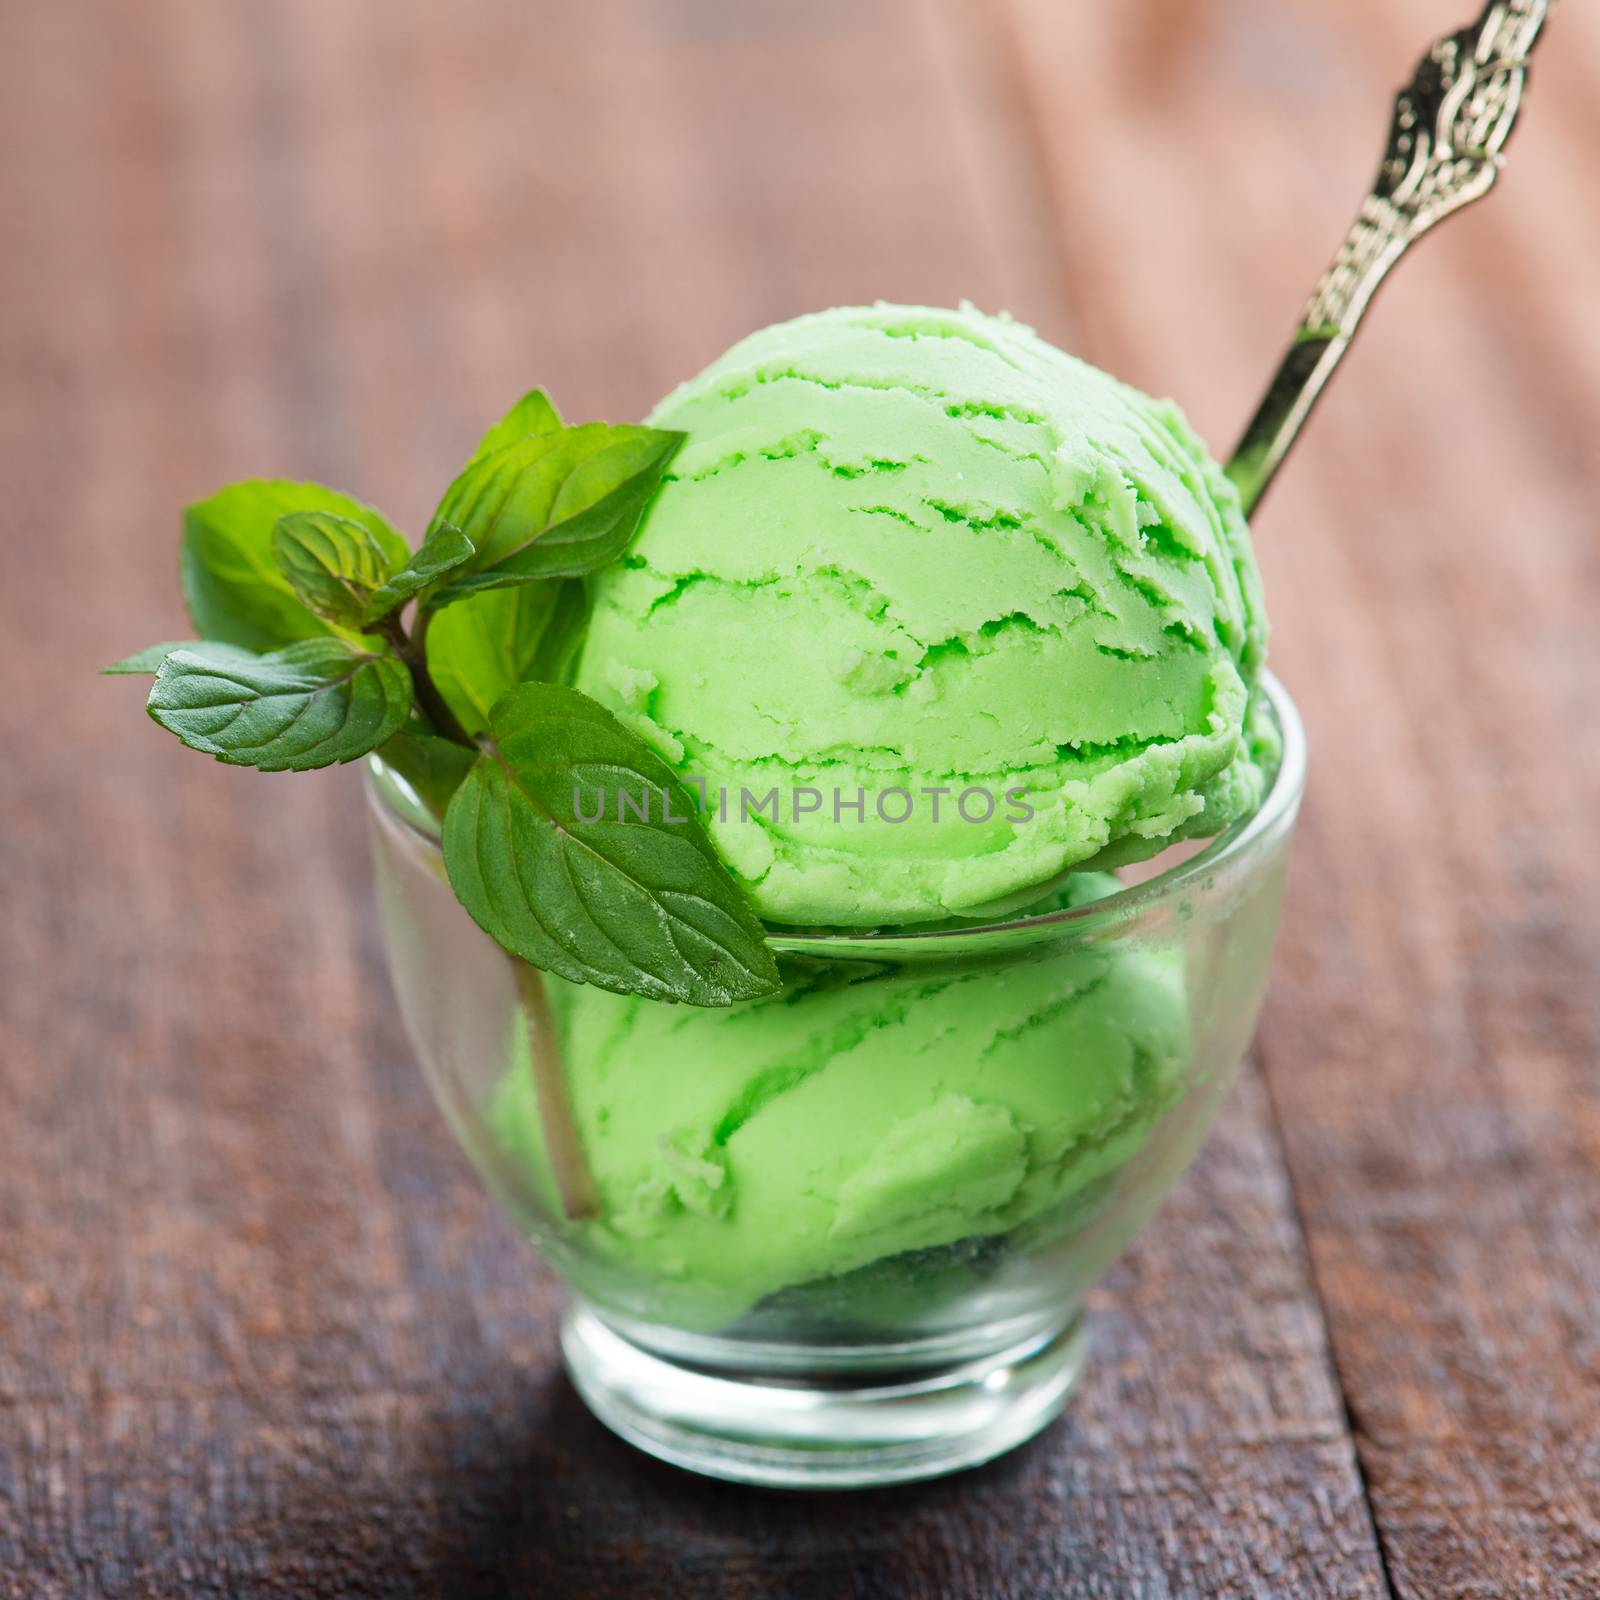 pistachio ice cream in cup close up by szefei